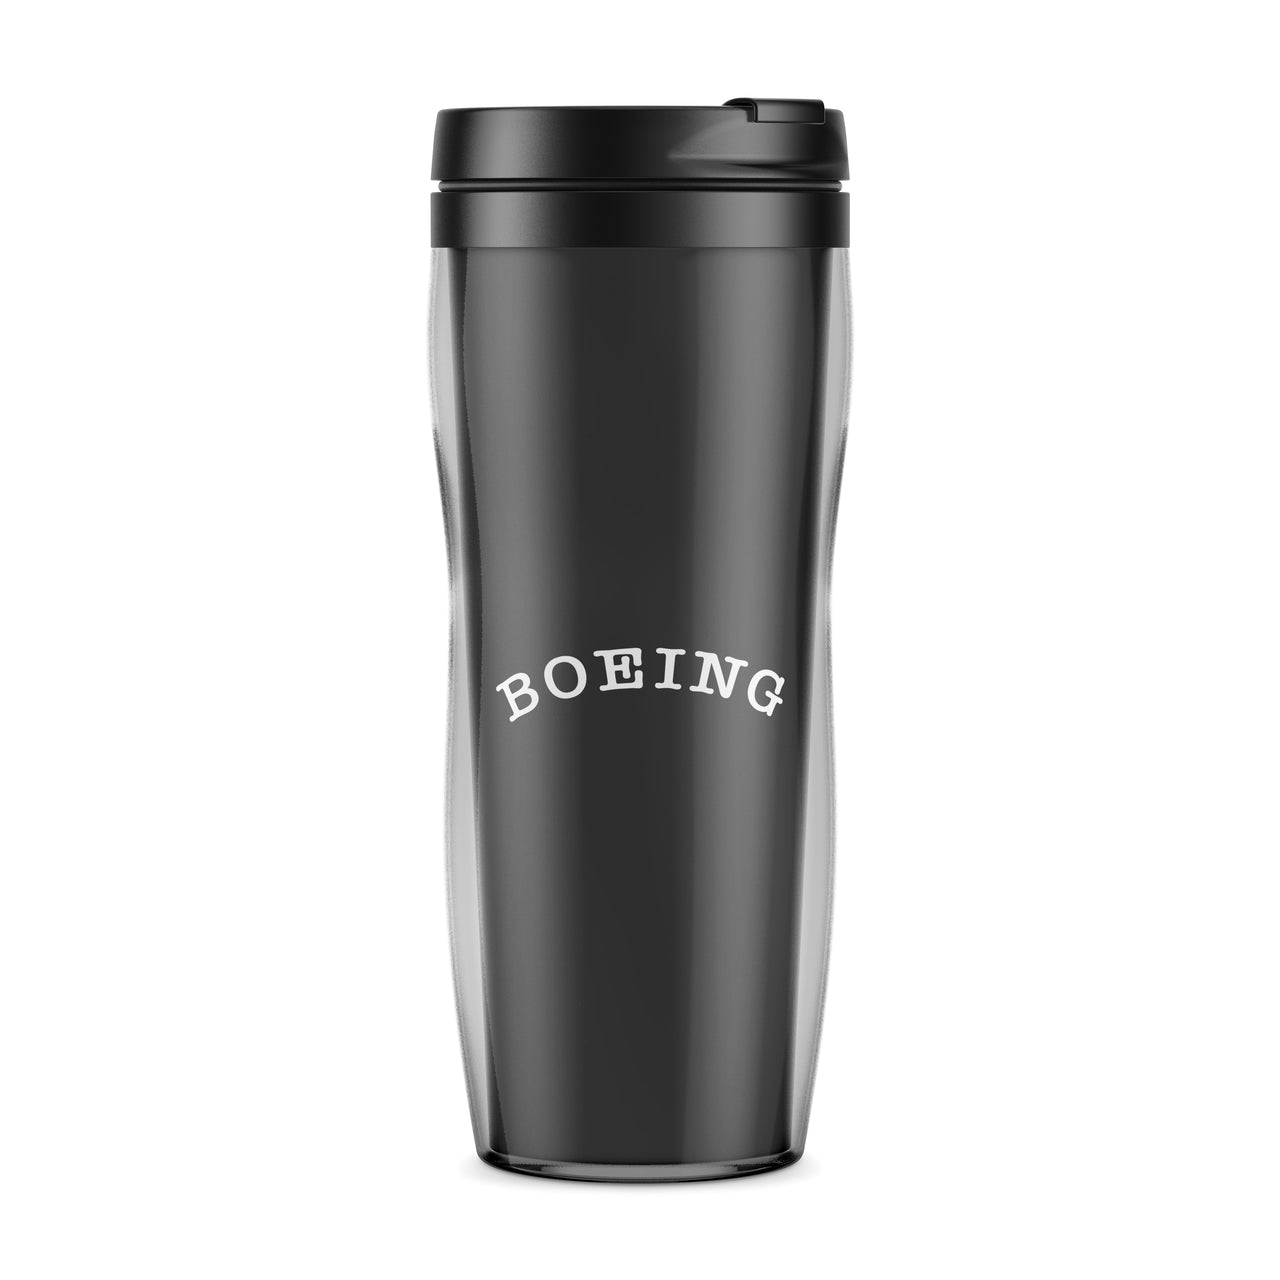 Special BOEING Text Designed Travel Mugs